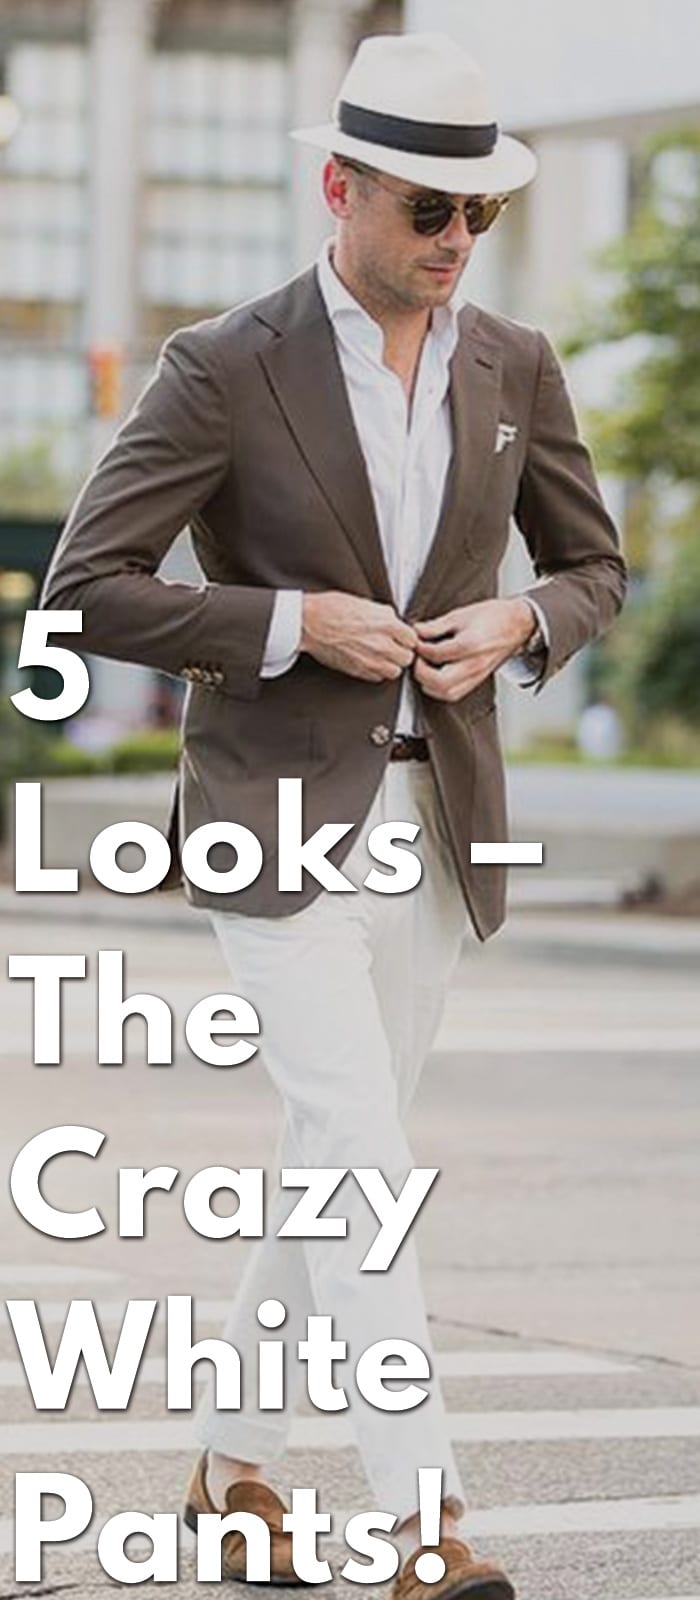 5-Looks–The-Crazy-White-Pants!